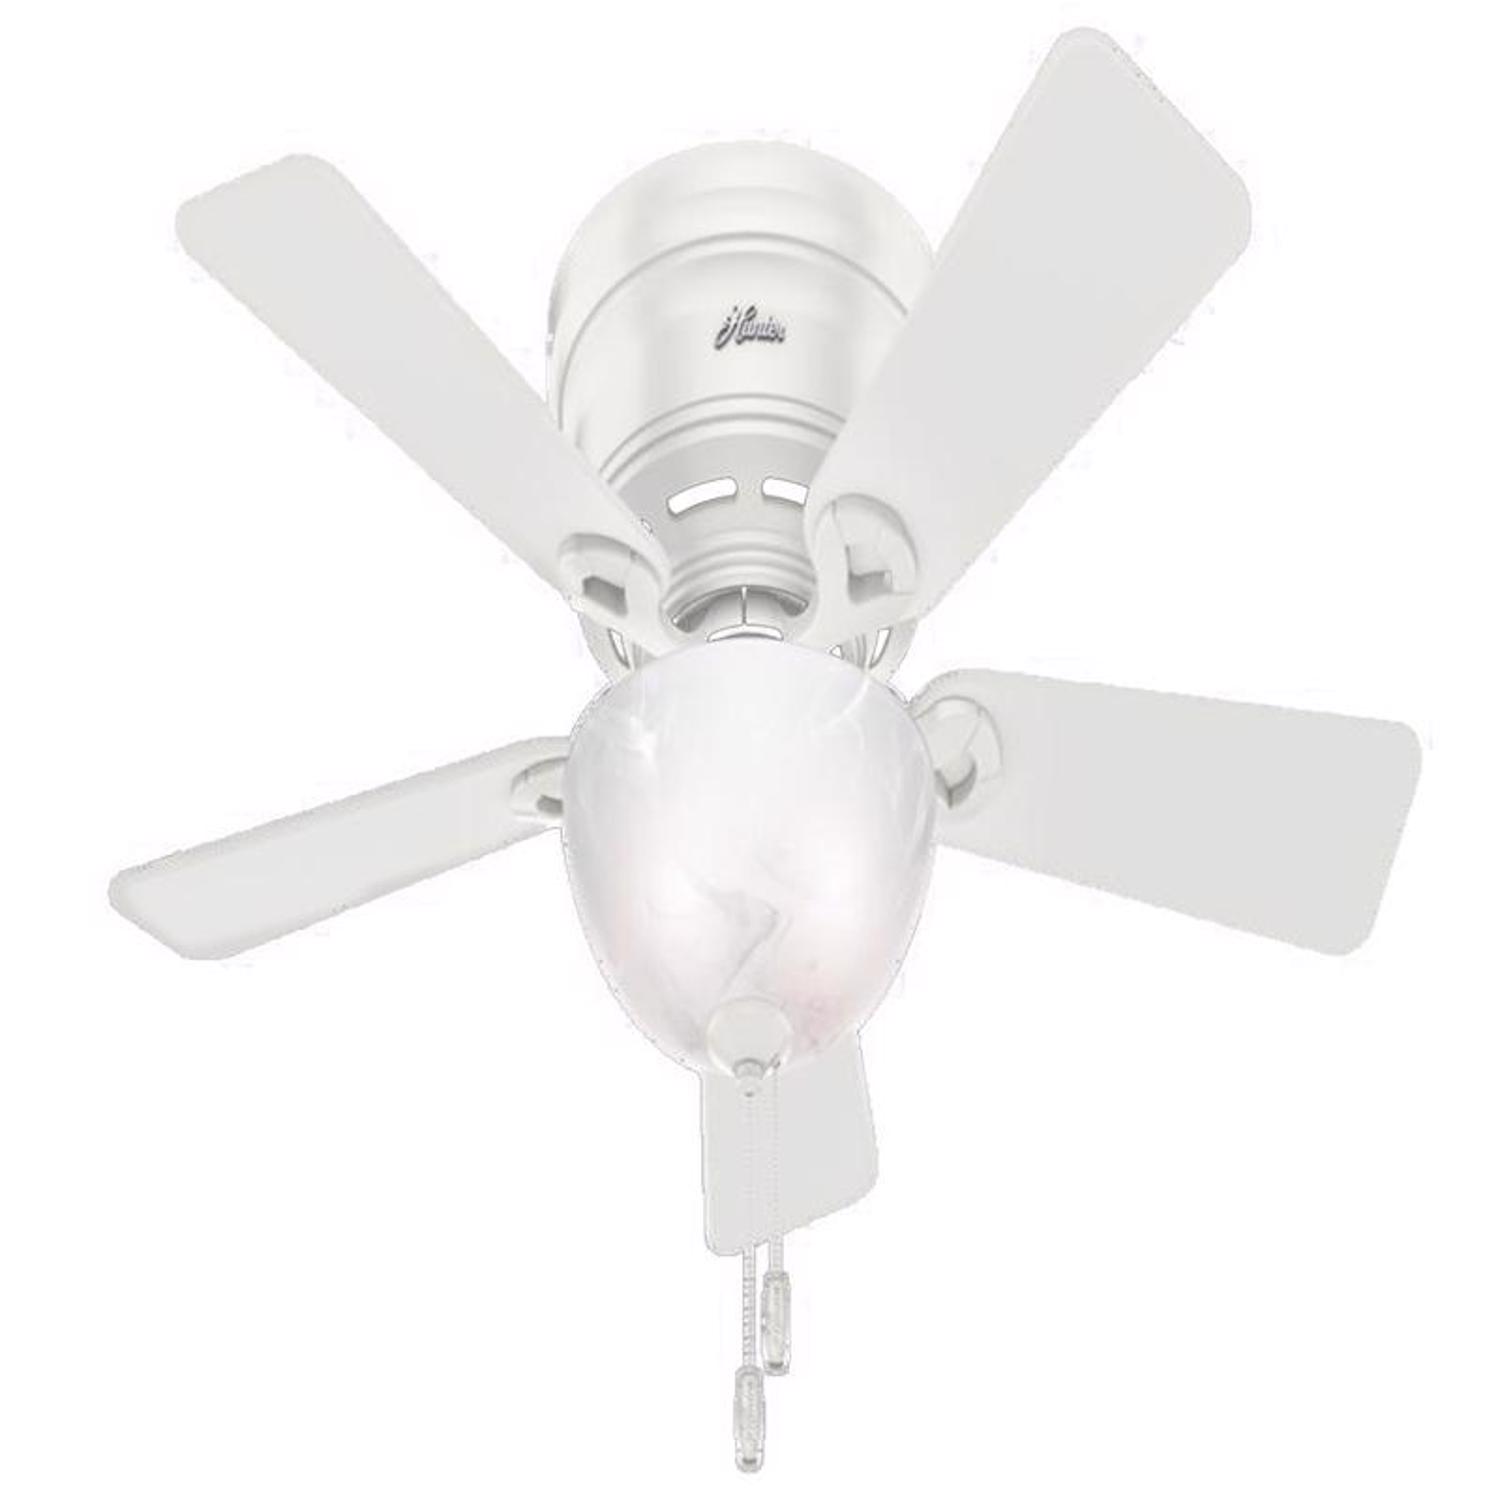 Photos - Light Bulb Hunter Haskell 42 in. White LED Indoor Ceiling Fan 52138 